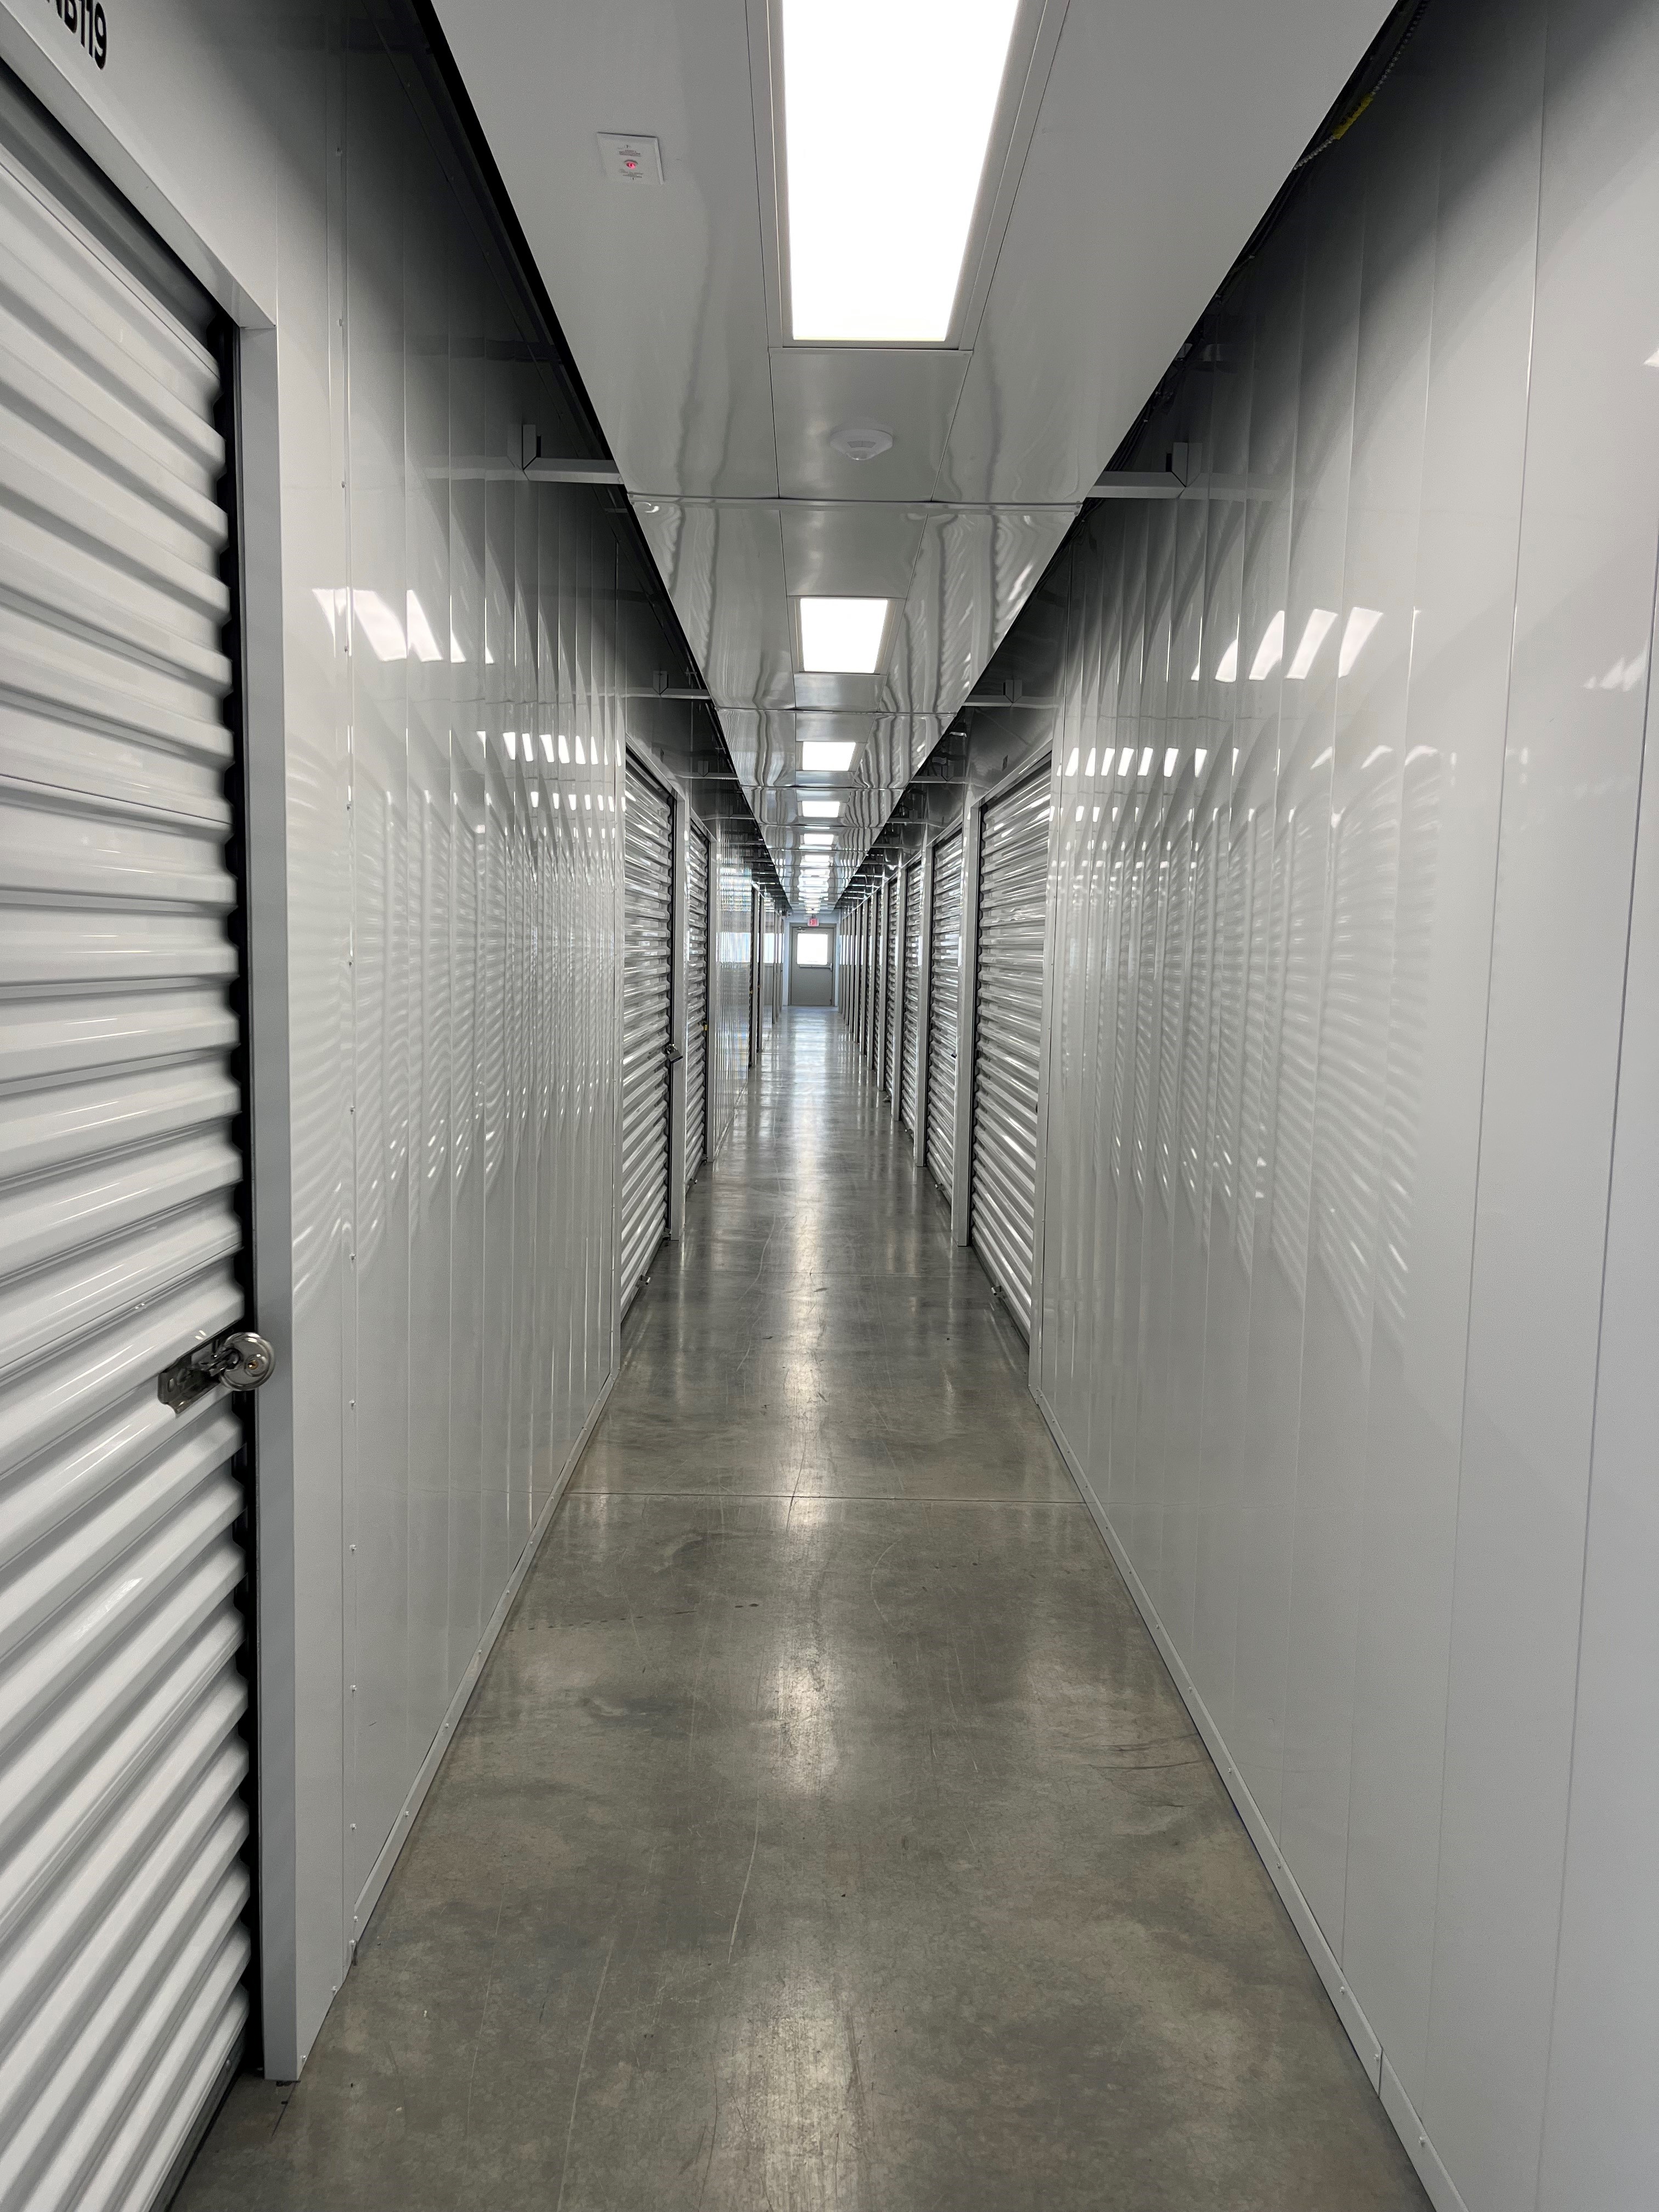 Climate-controlled storage interior at Huntingburg Access Storage, featuring pristine white doors and a spotless hallway for a secure, clean environment.